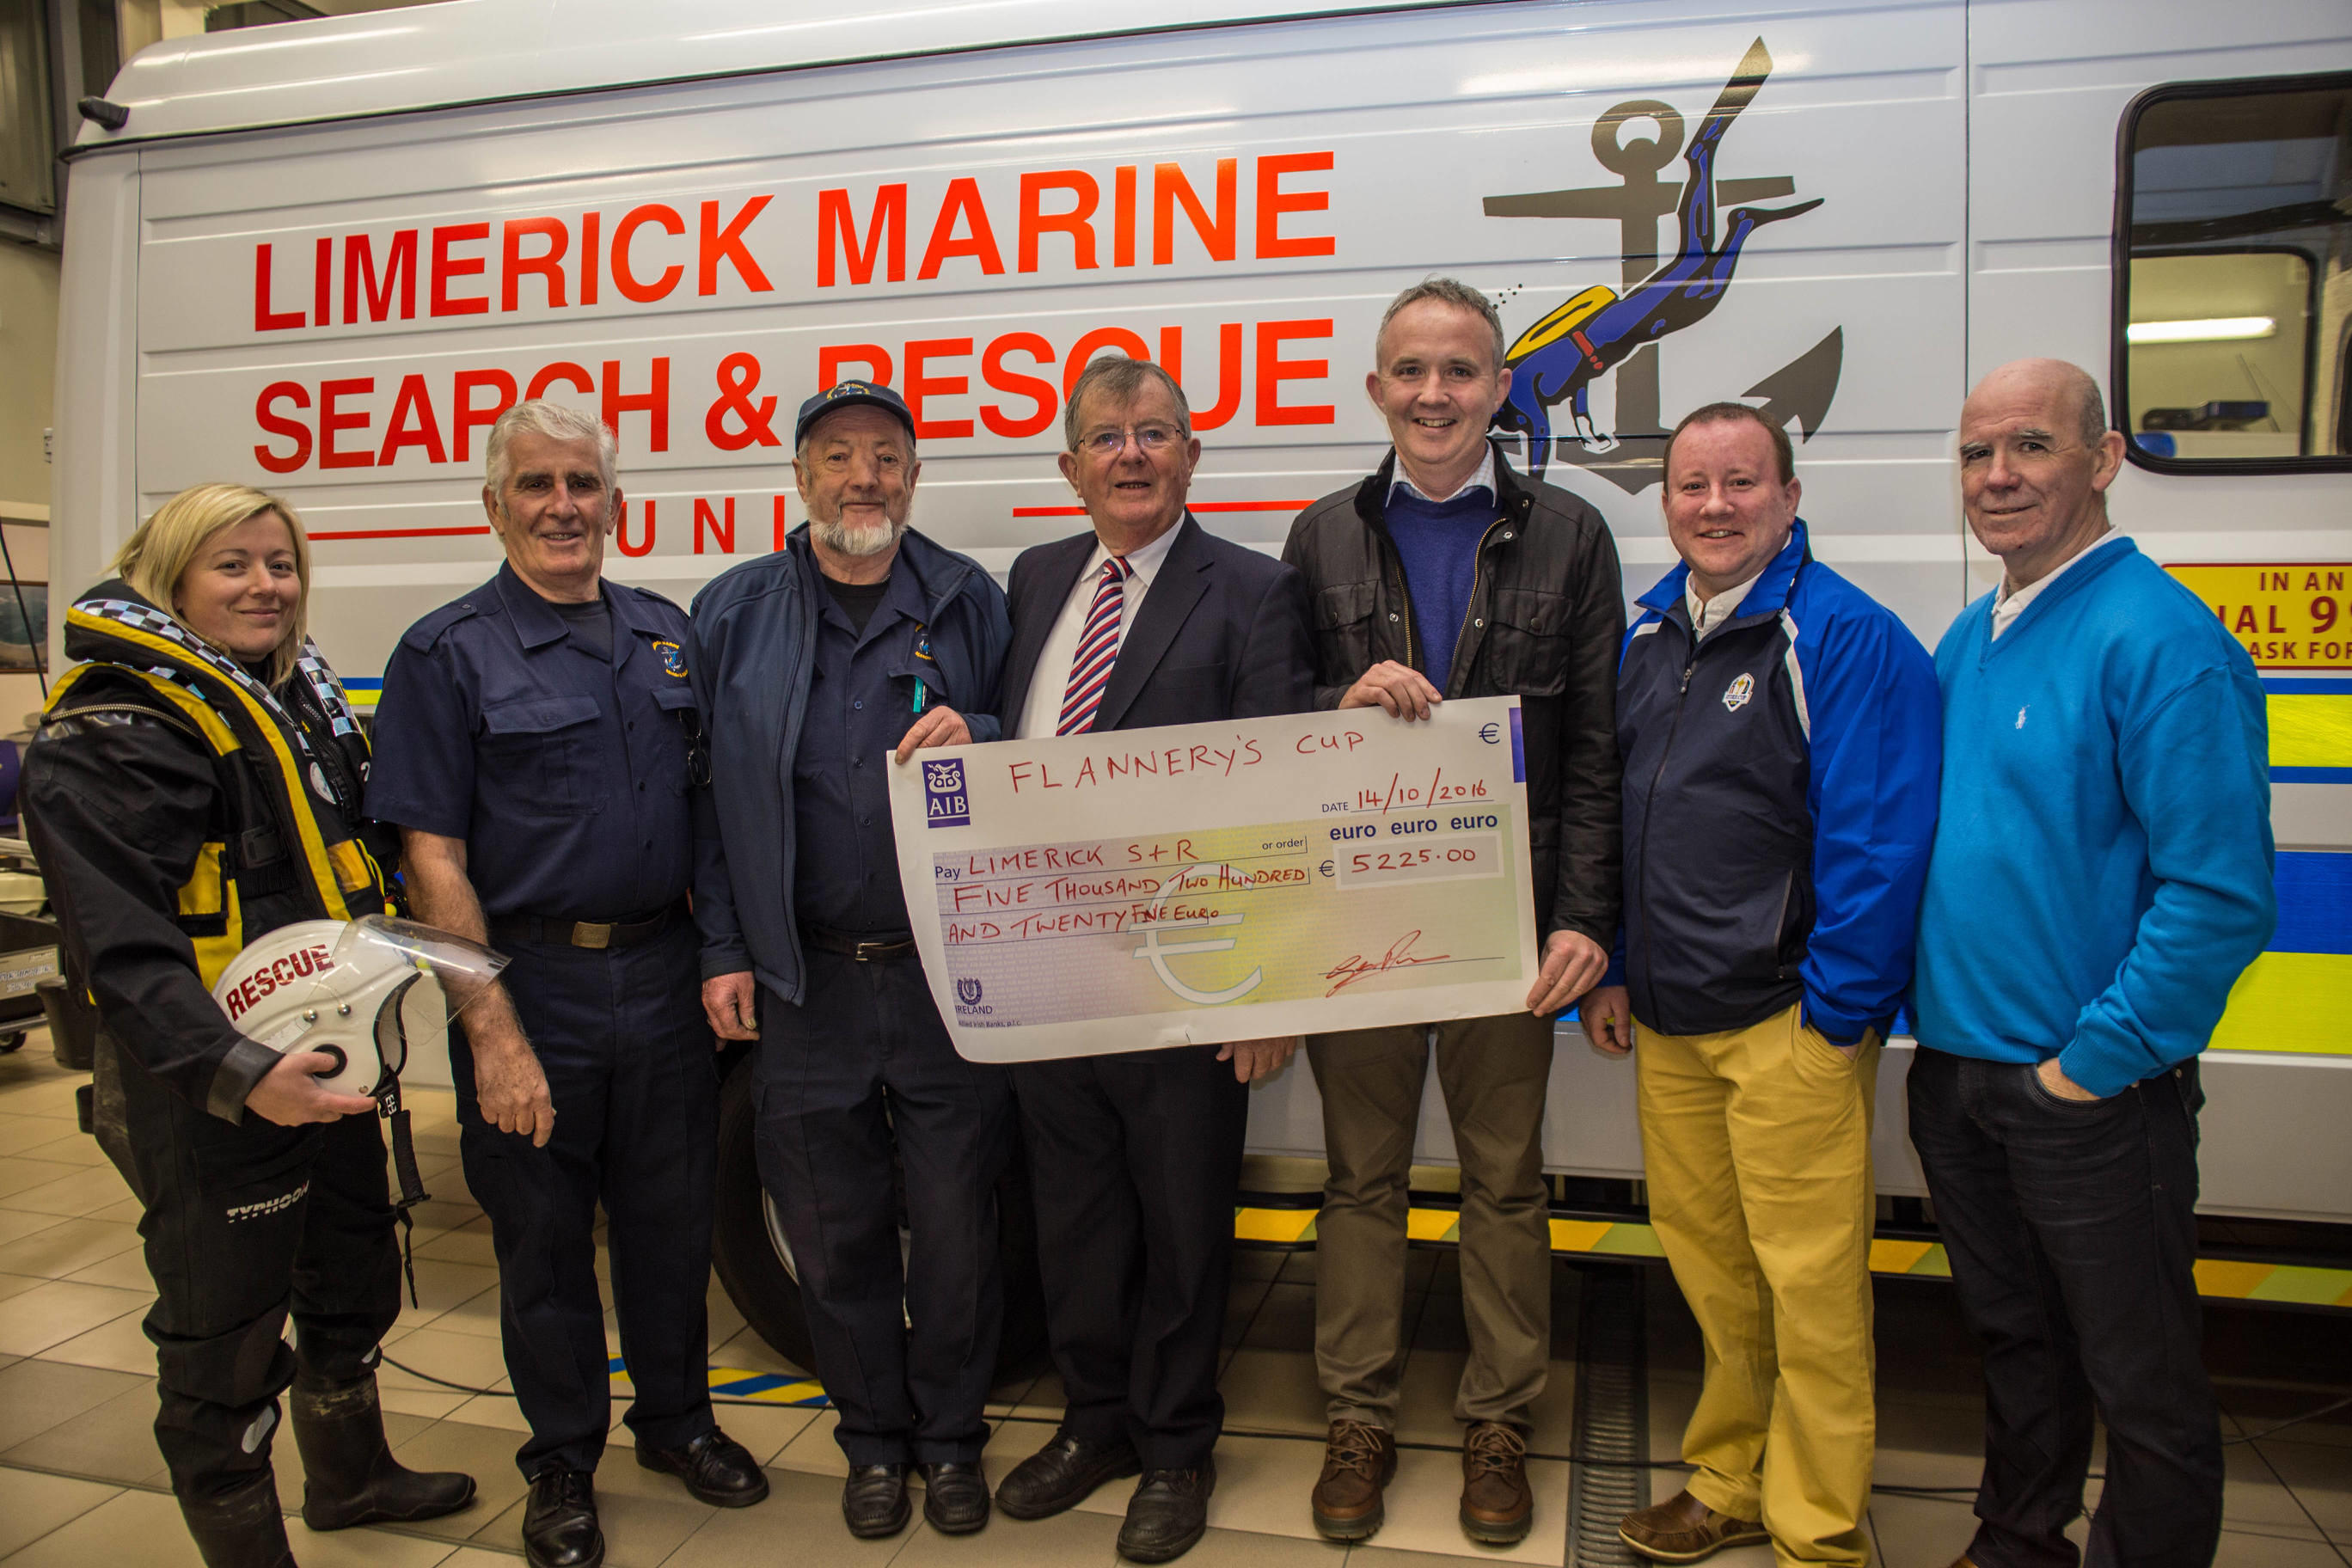 Pat Flannery Golf Classic raise Limerick Marine Search Rescue funds